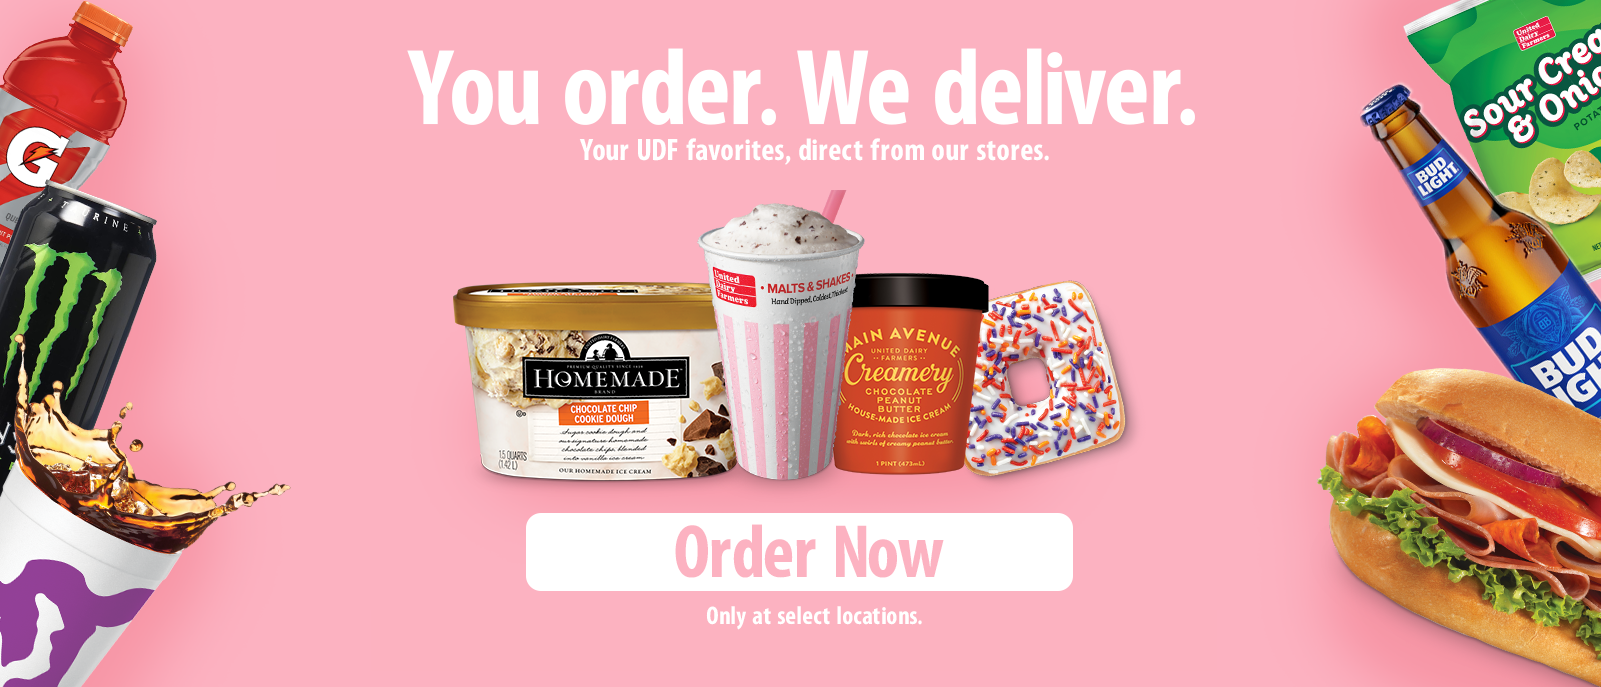 You order. We Deliver. Your UDF favorites, direct from our stores. Order Now! Only at select stores.